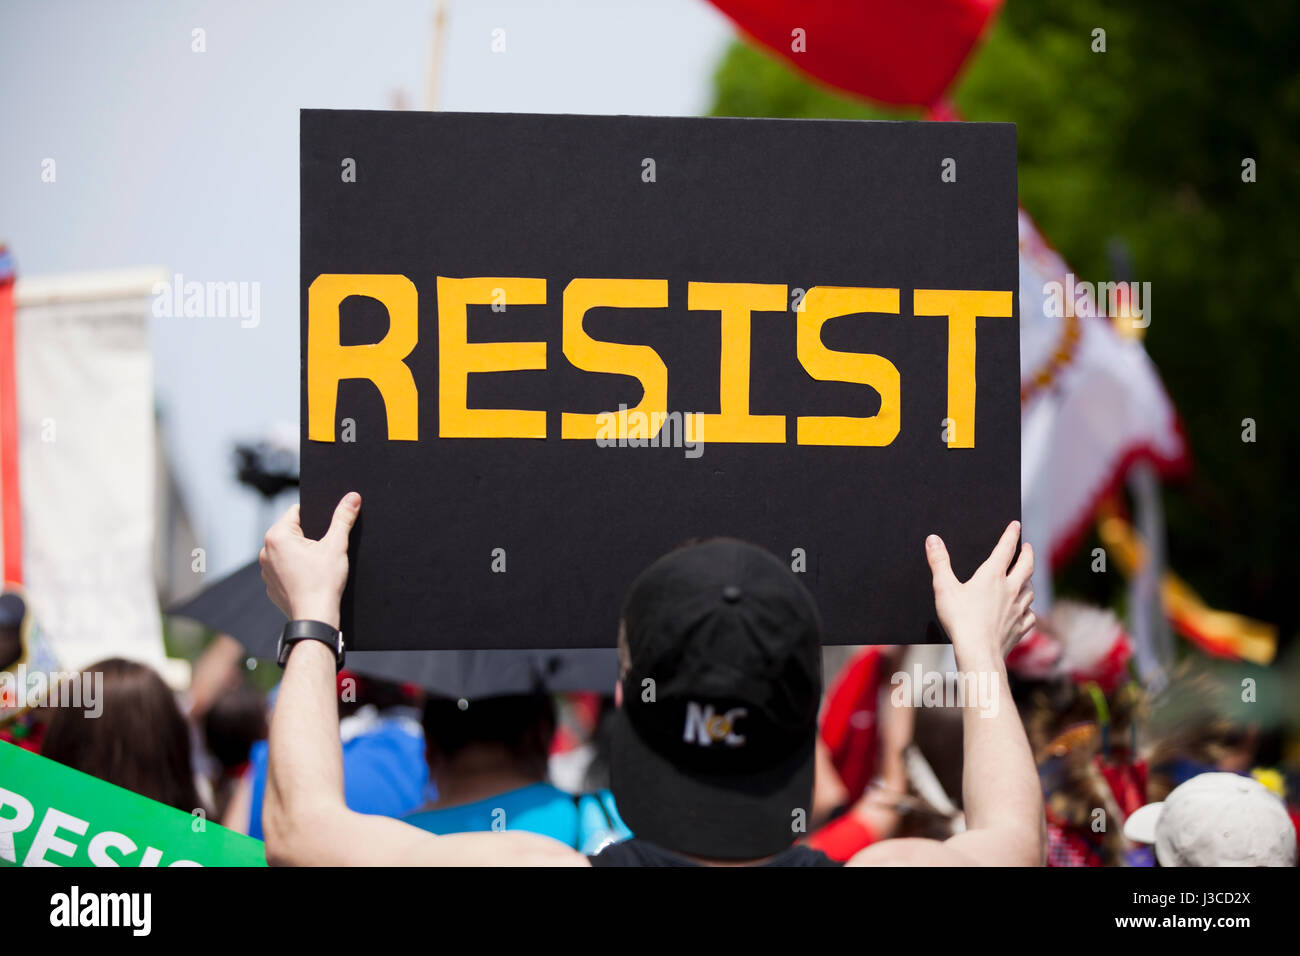 Resist sign at Anti Trump protest rally - USA Stock Photo